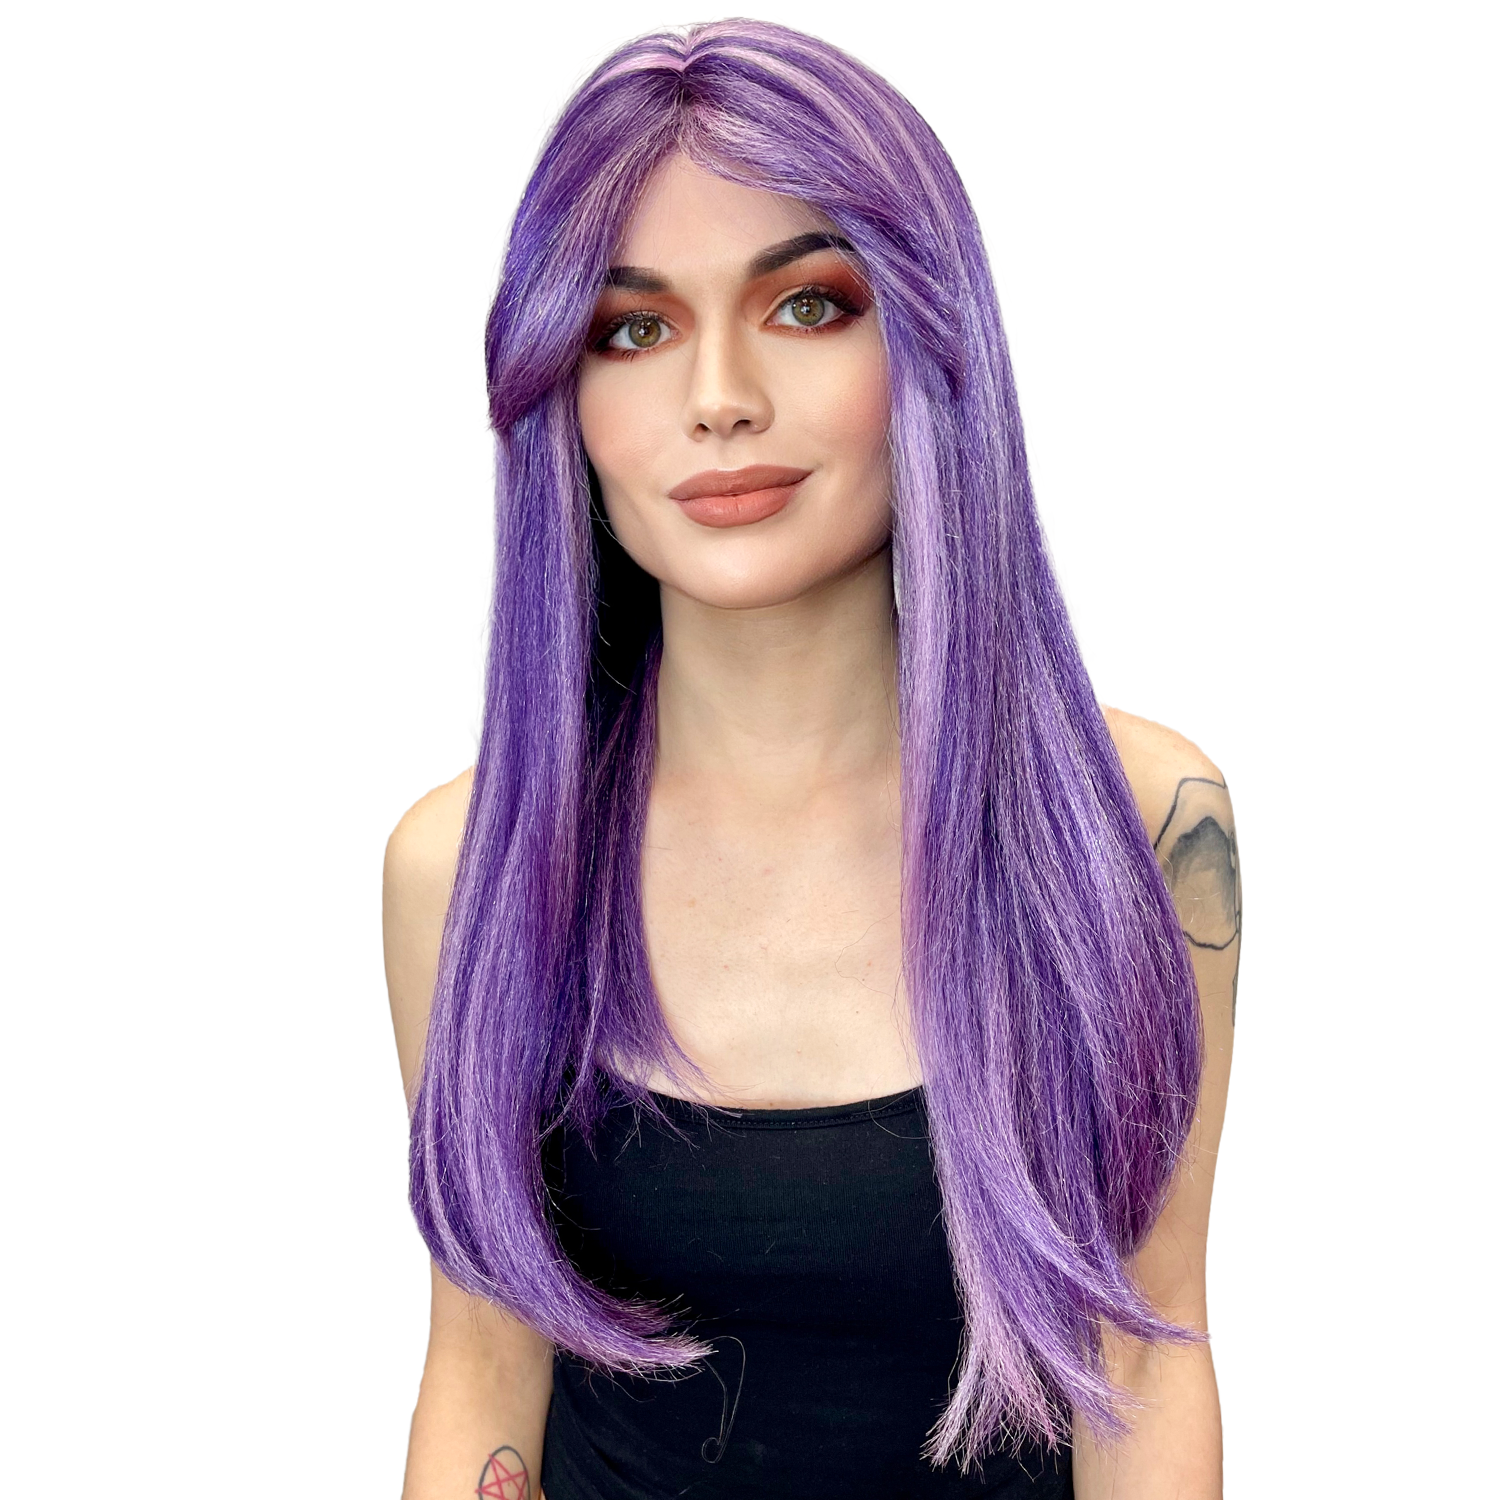 Kelly Long Straight Hair Wig with Side Bang